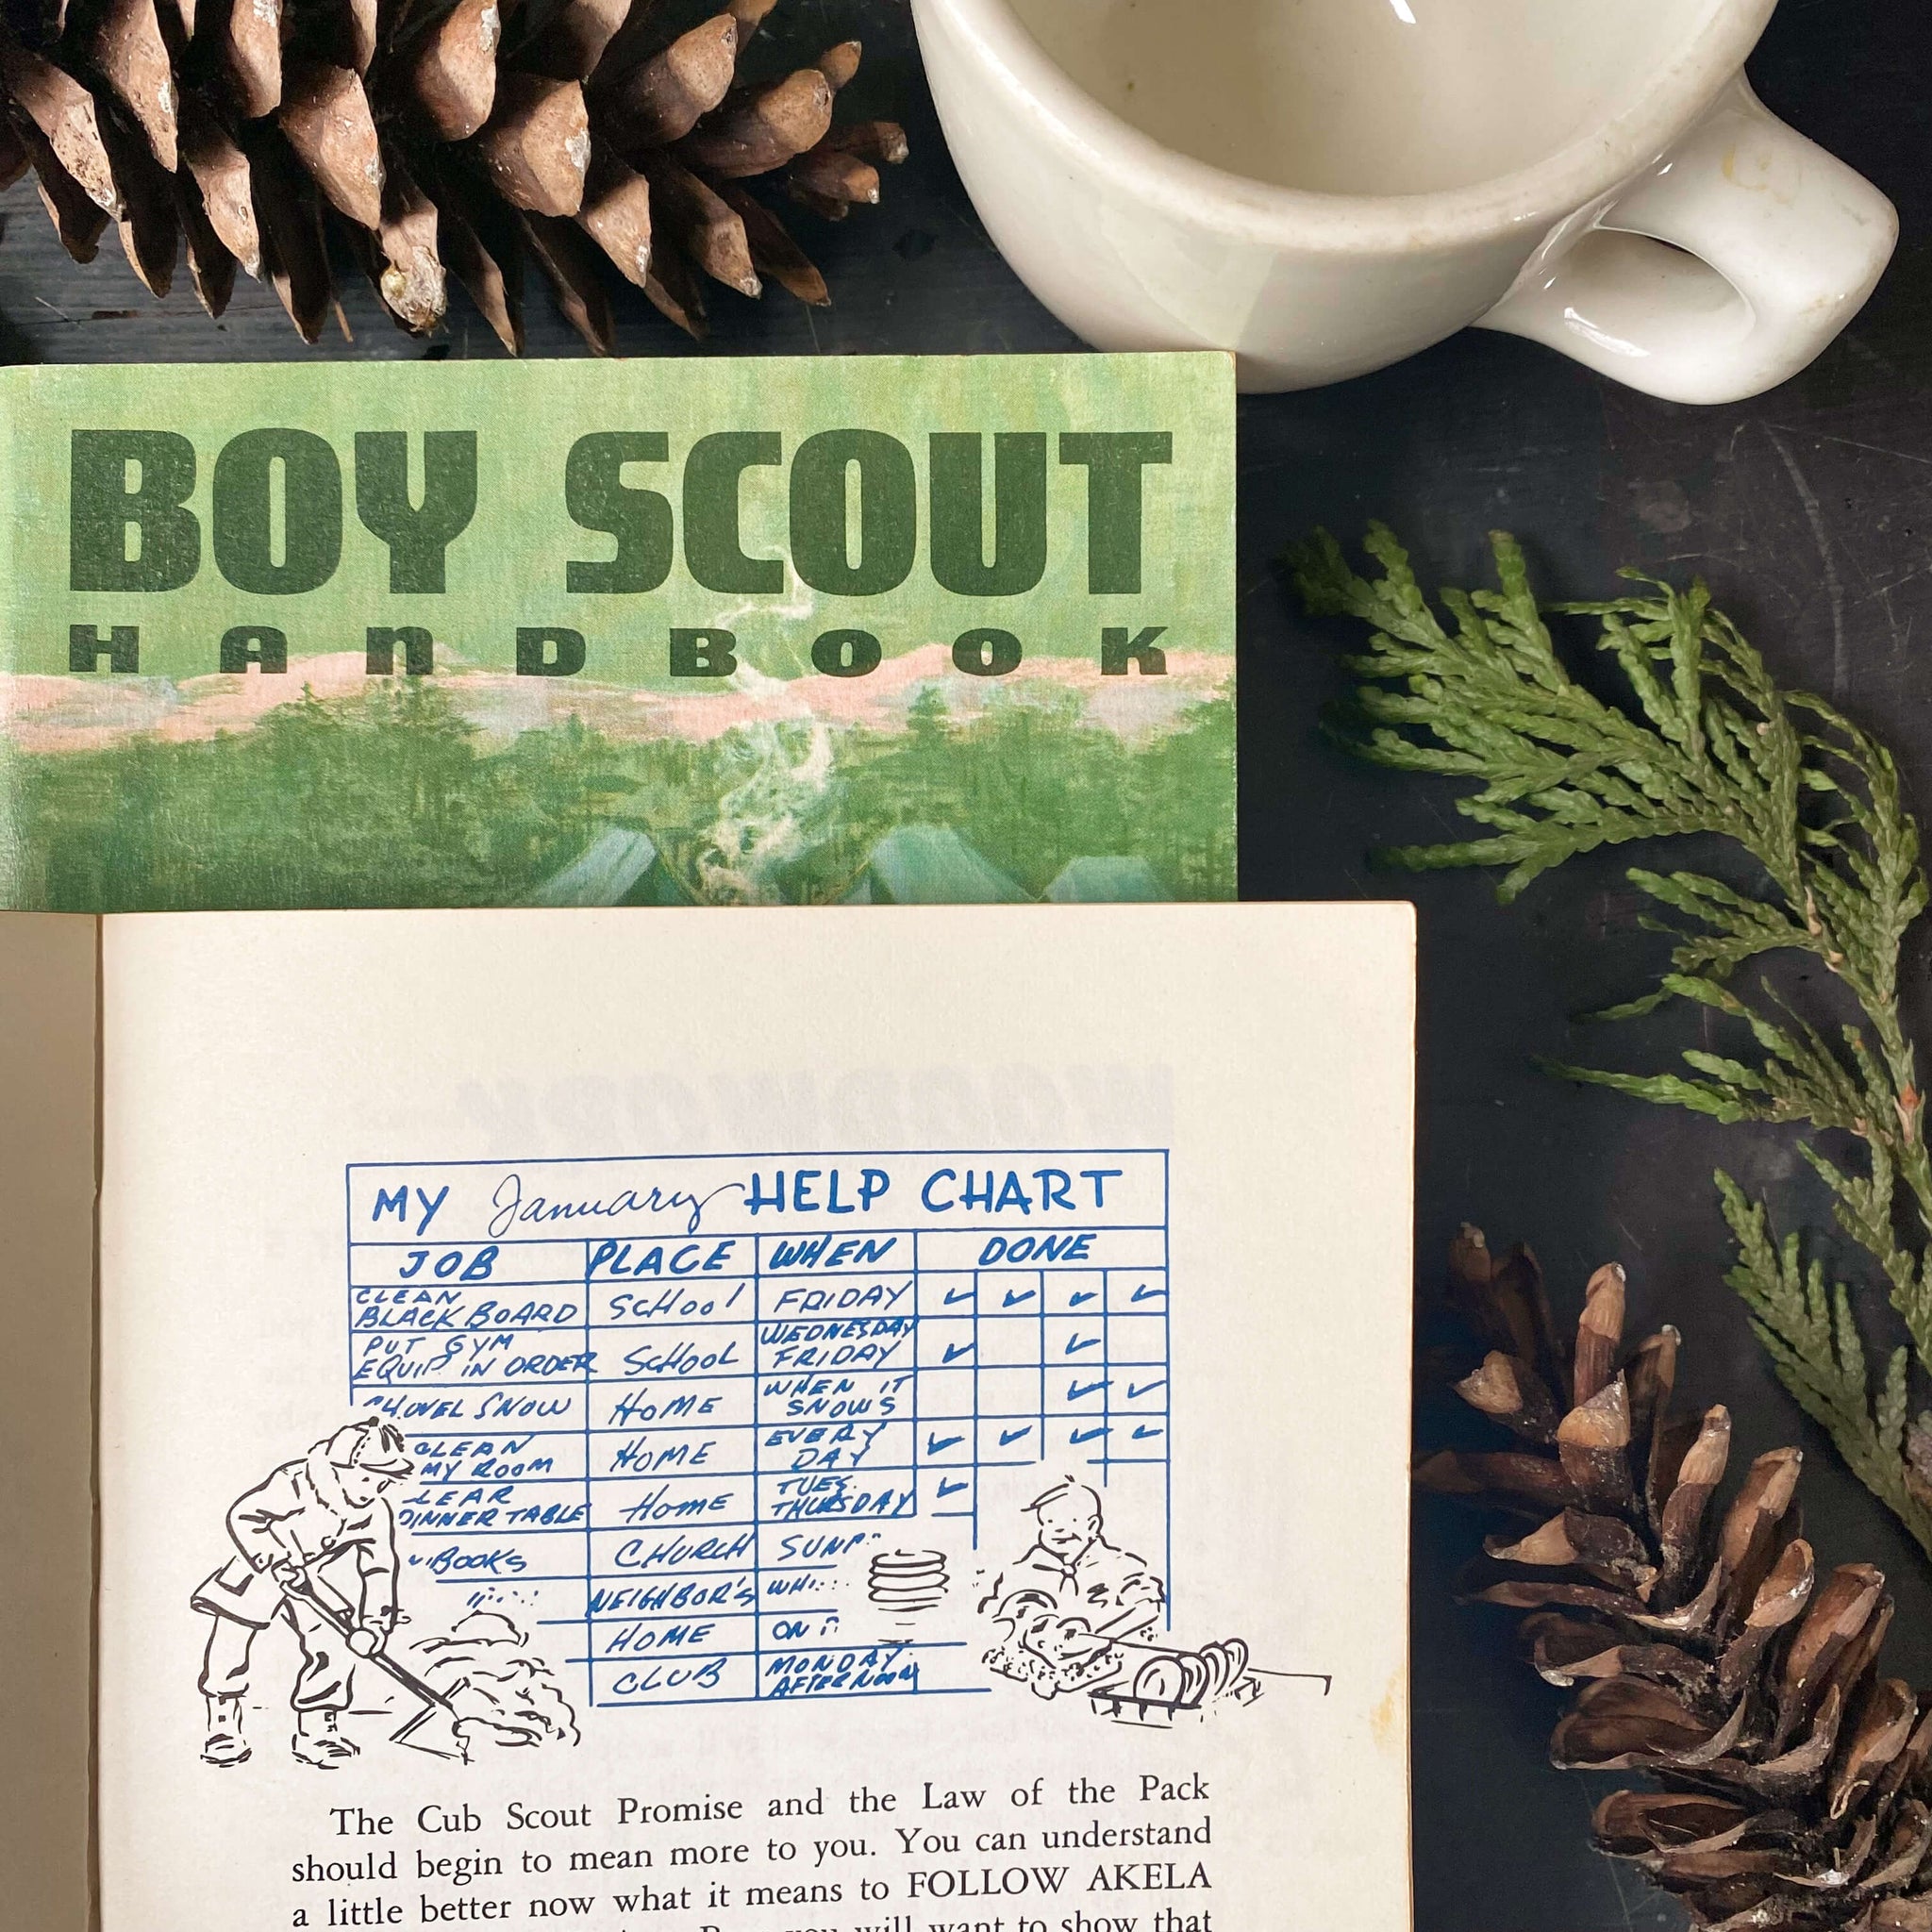 Vintage Midcentury Boy Scout & Cub Scout Book Collection - Set of Three - Bear, Wolf & Boy Scout circa 1959-1967